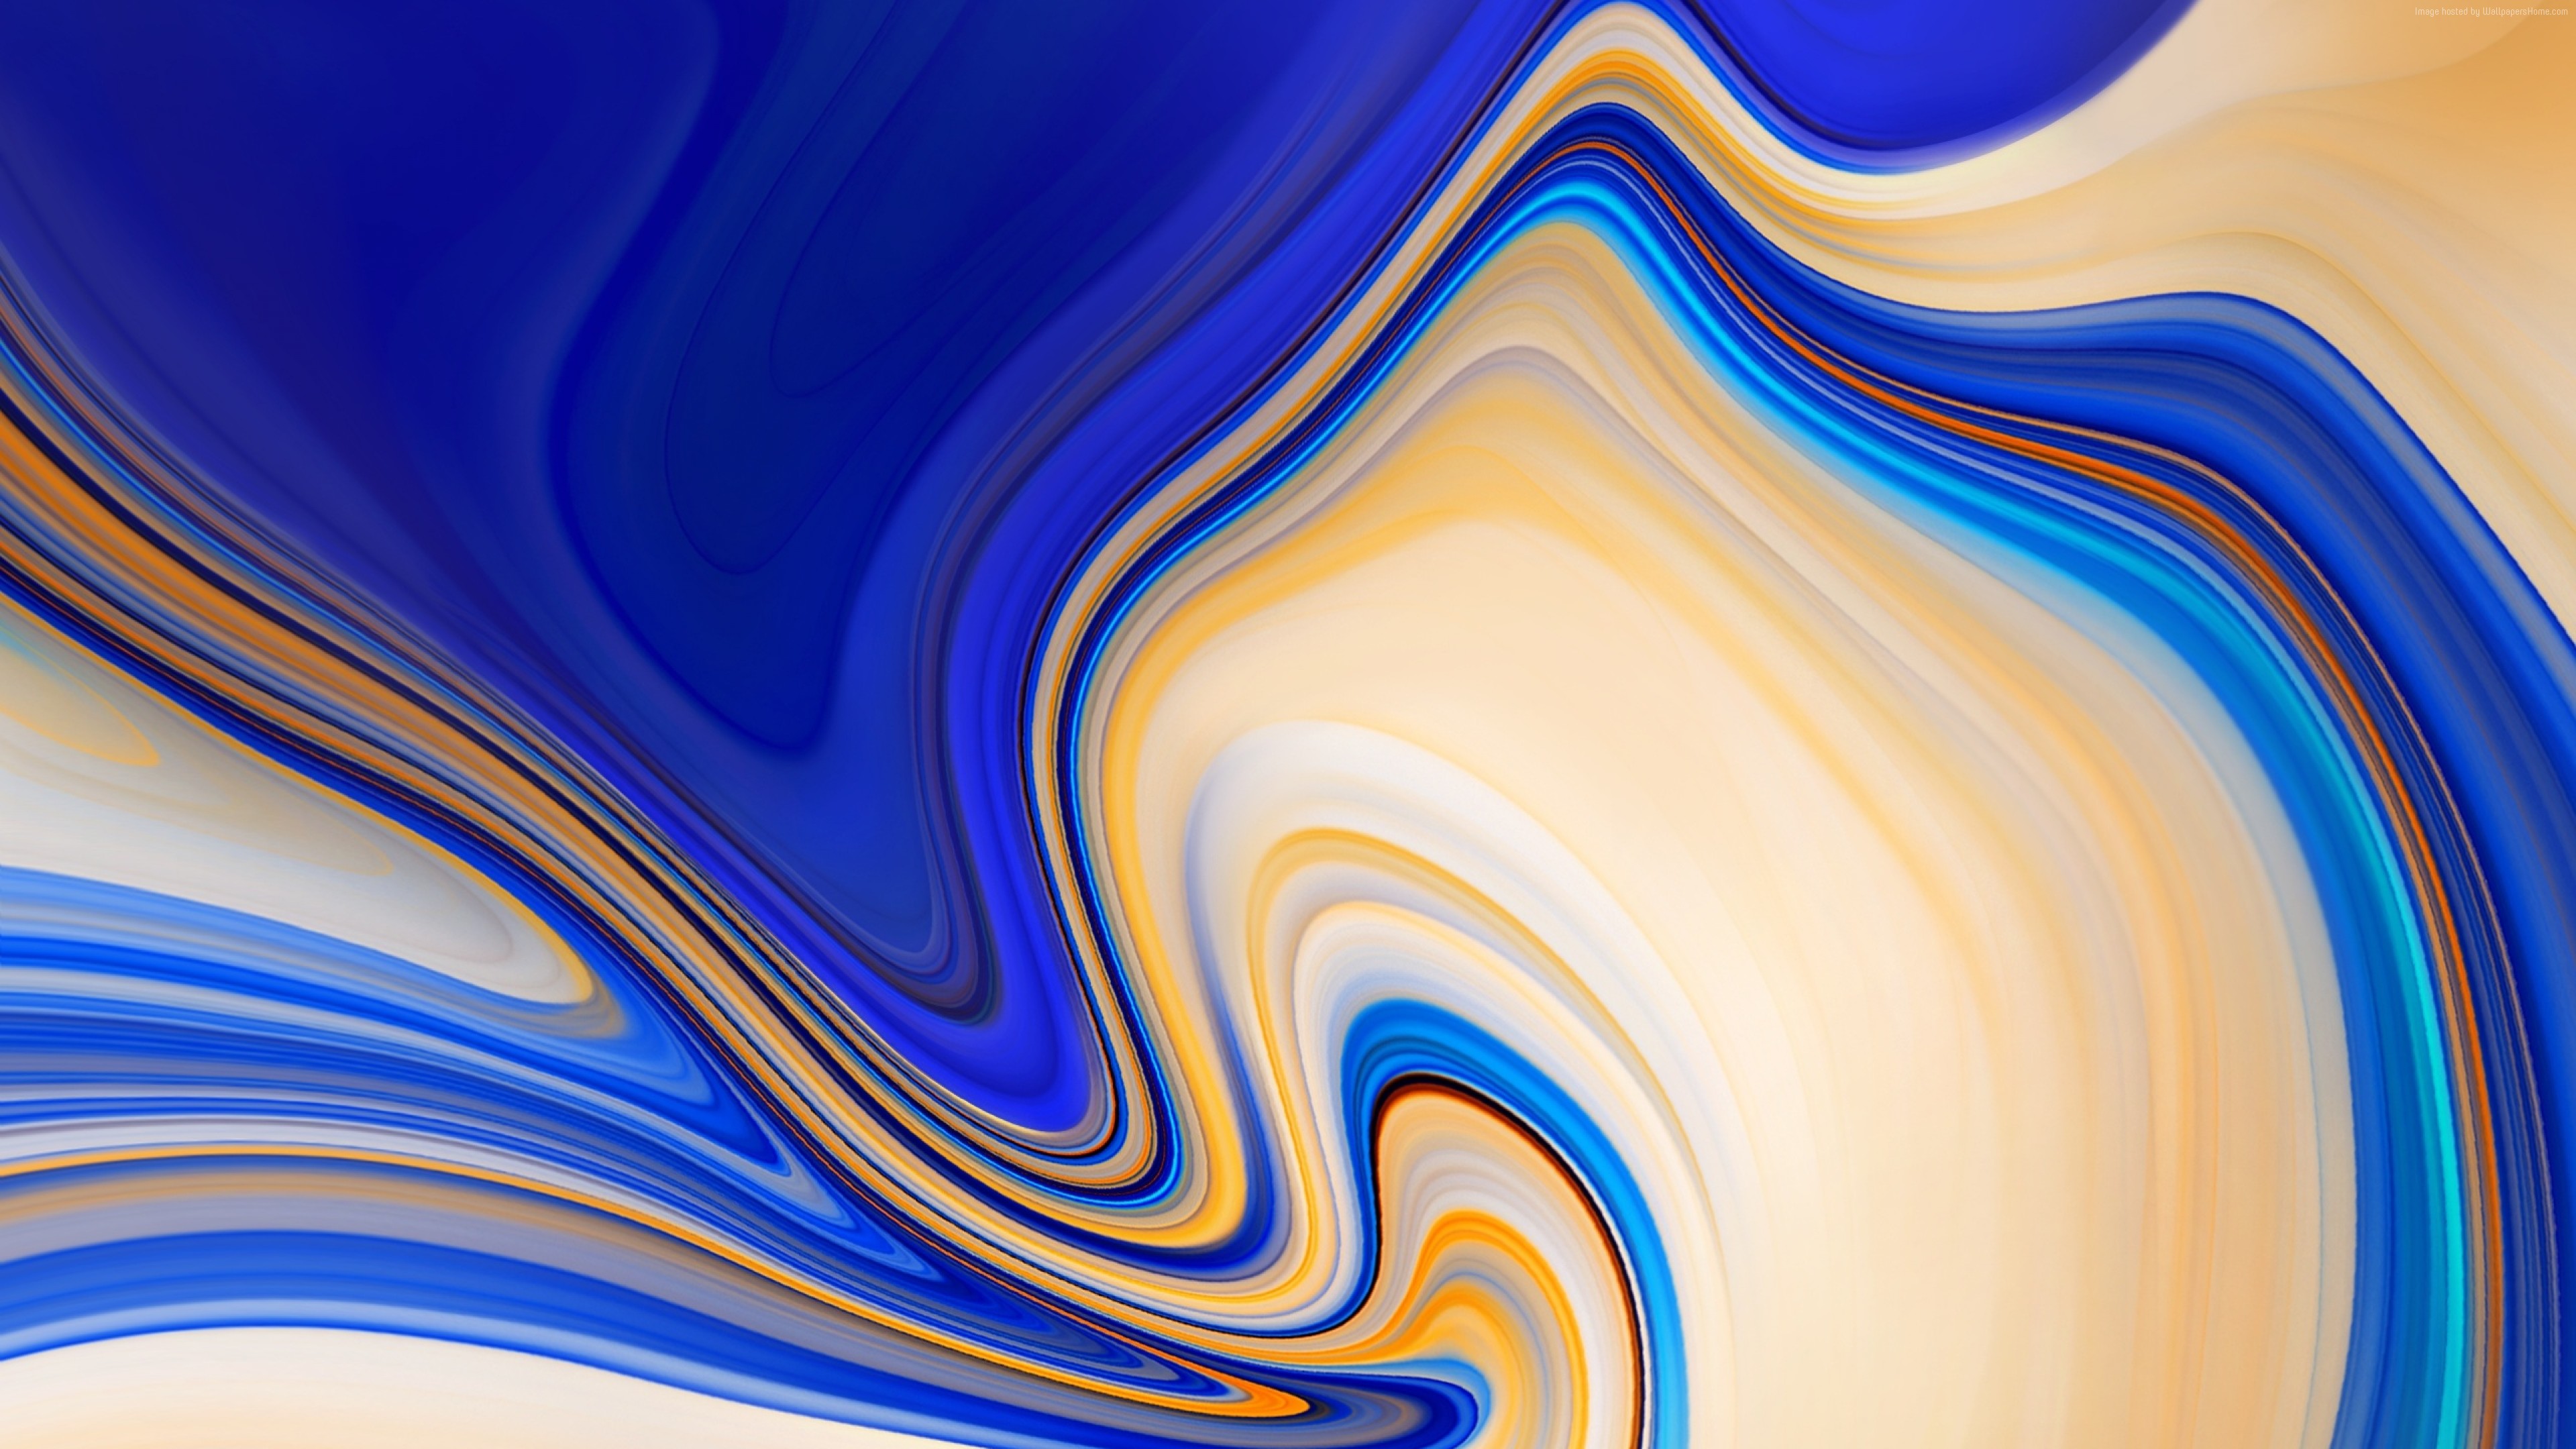 Wallpaper Samsung Galaxy Note 9, Android 8.0, Android Oreo, abstract, colorful, Abstract